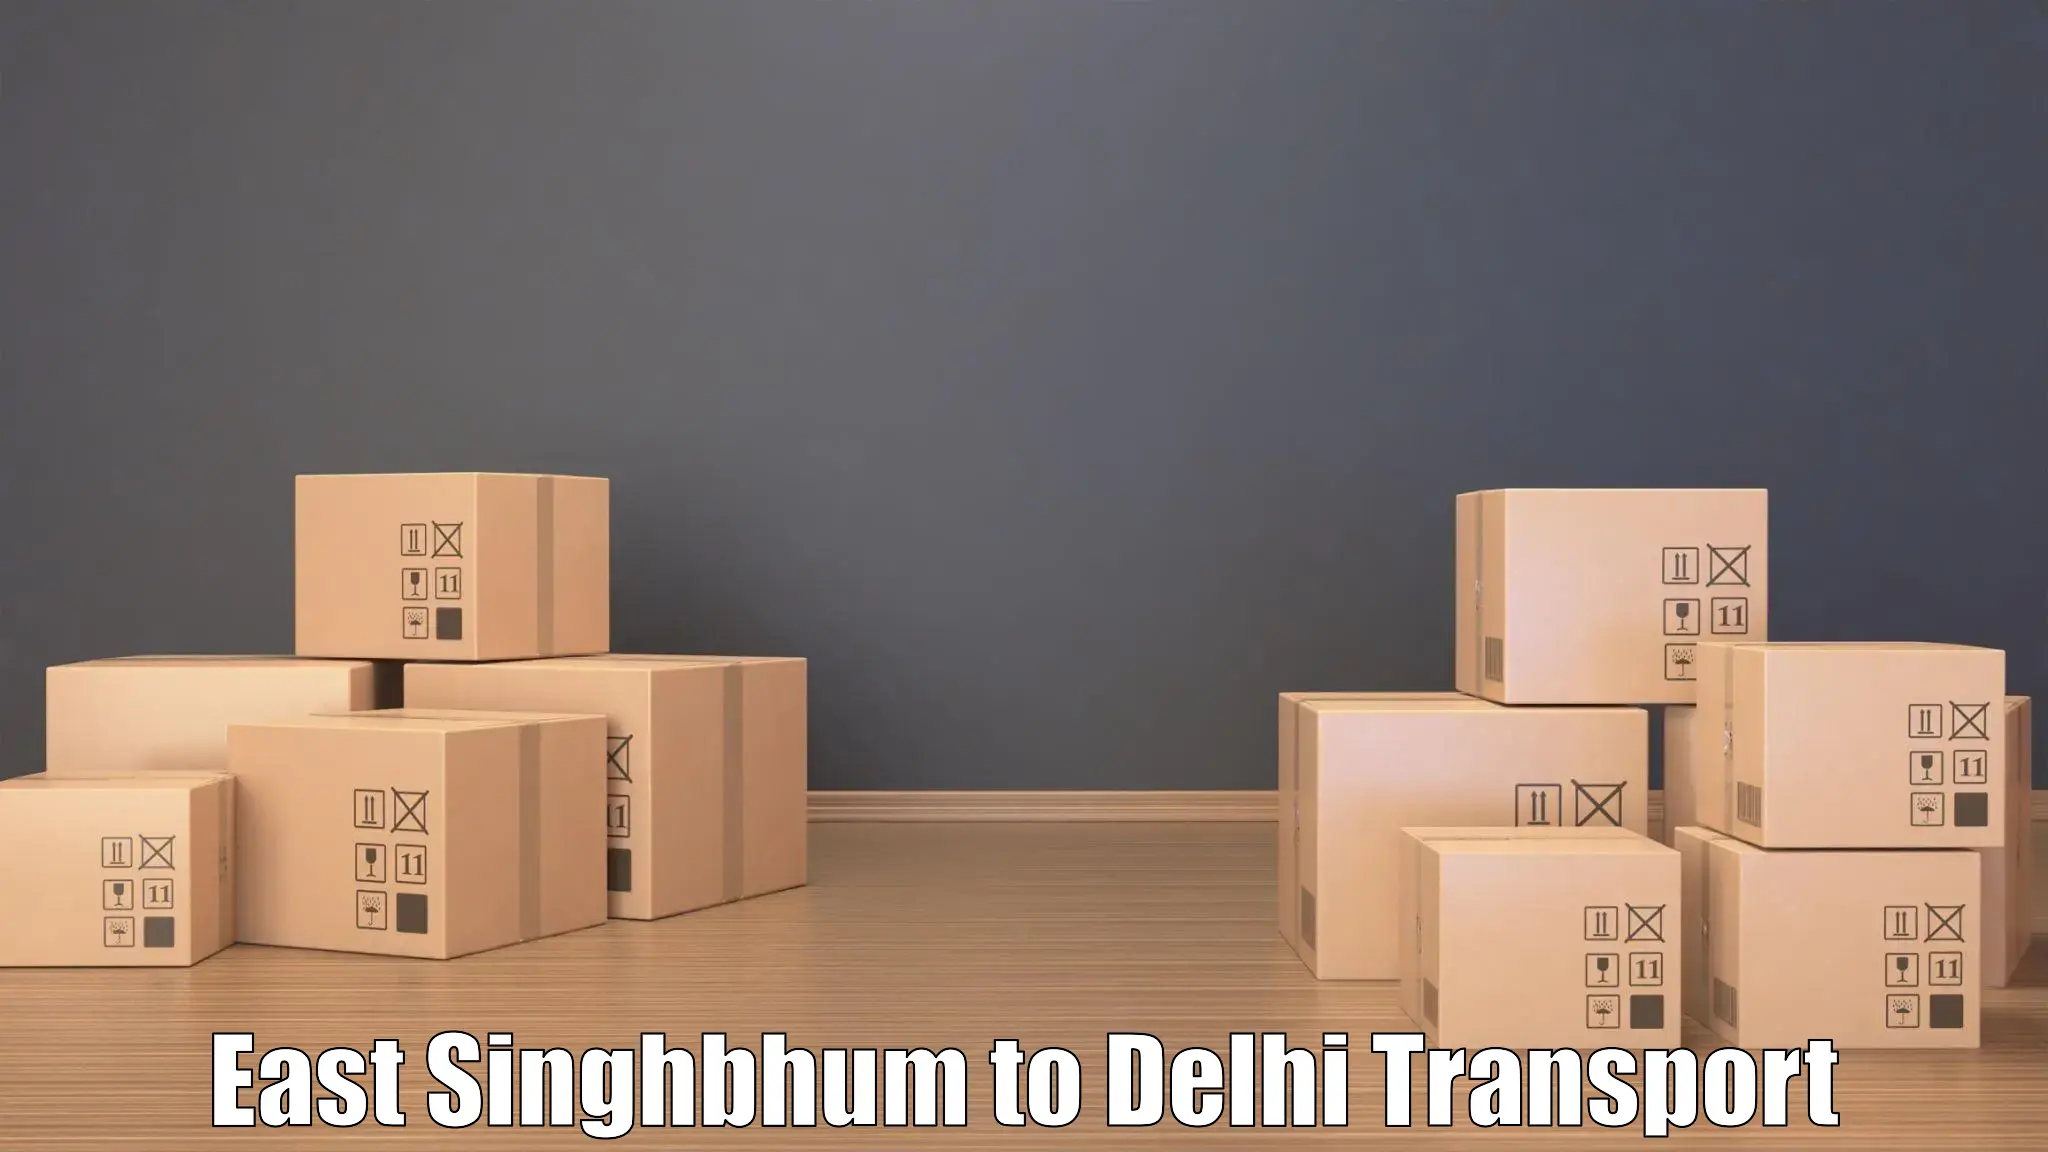 Transport bike from one state to another East Singhbhum to Delhi